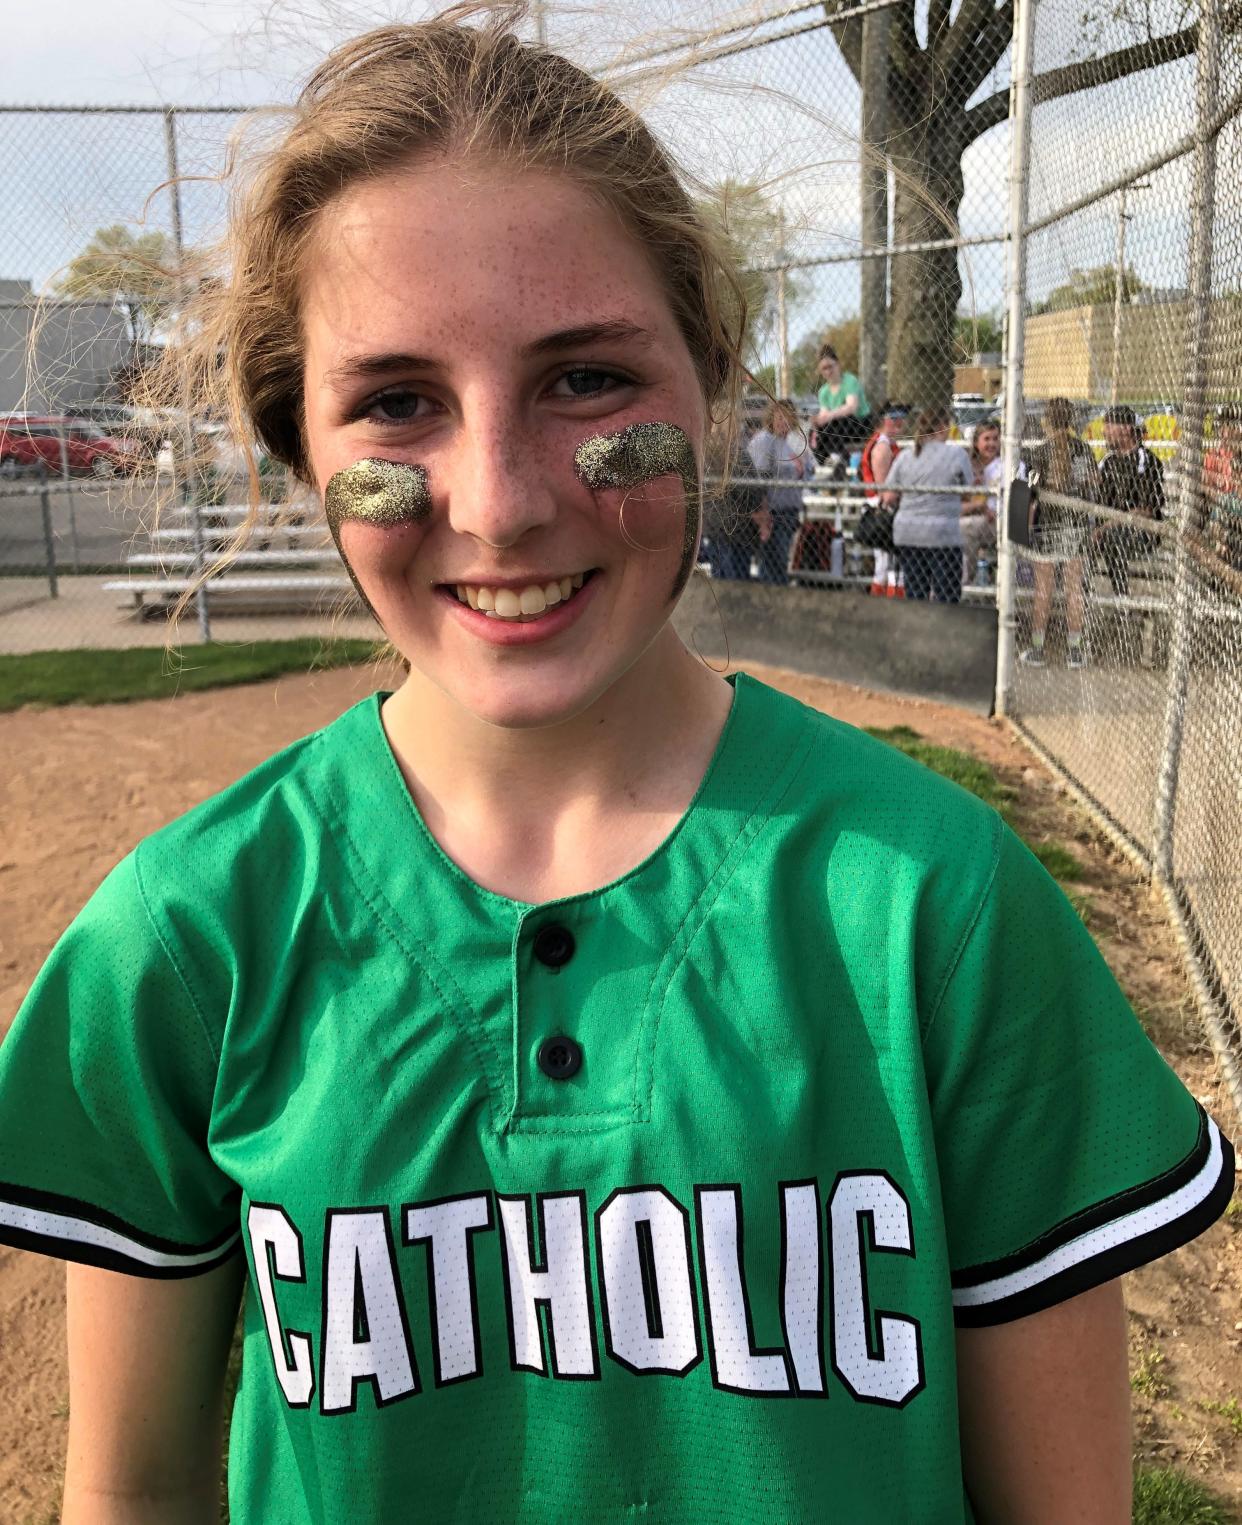 Making her first varsity start in the circle, Newark Catholic sophomore Ally Rothwiler pitched a five-inning two hitter in the 11-1 victory Friday against visiting Heath.